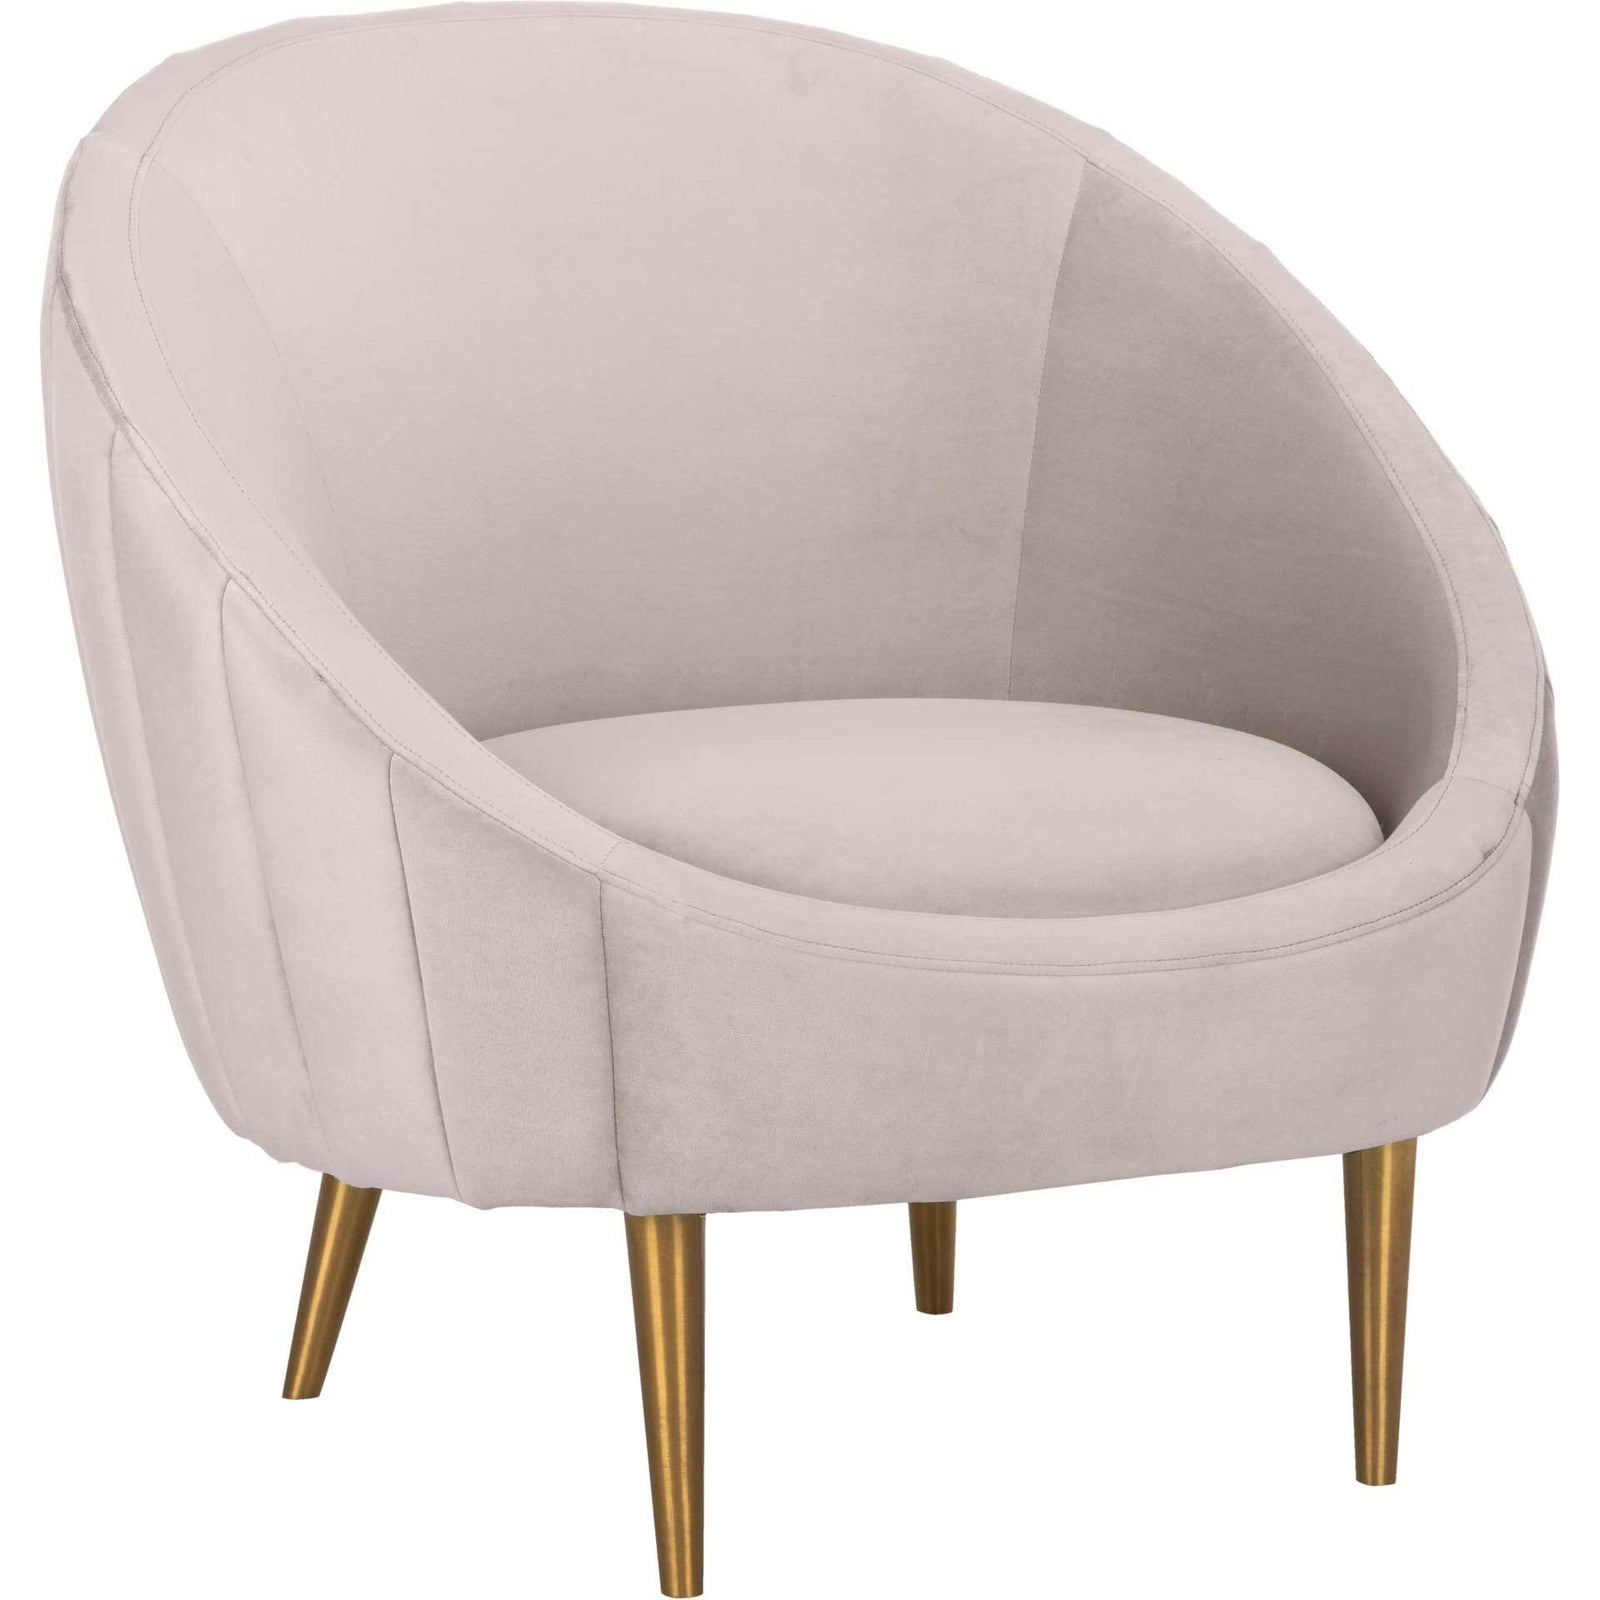 Raymond Channel Tufted Tub Chair Pale Taupe/Gold